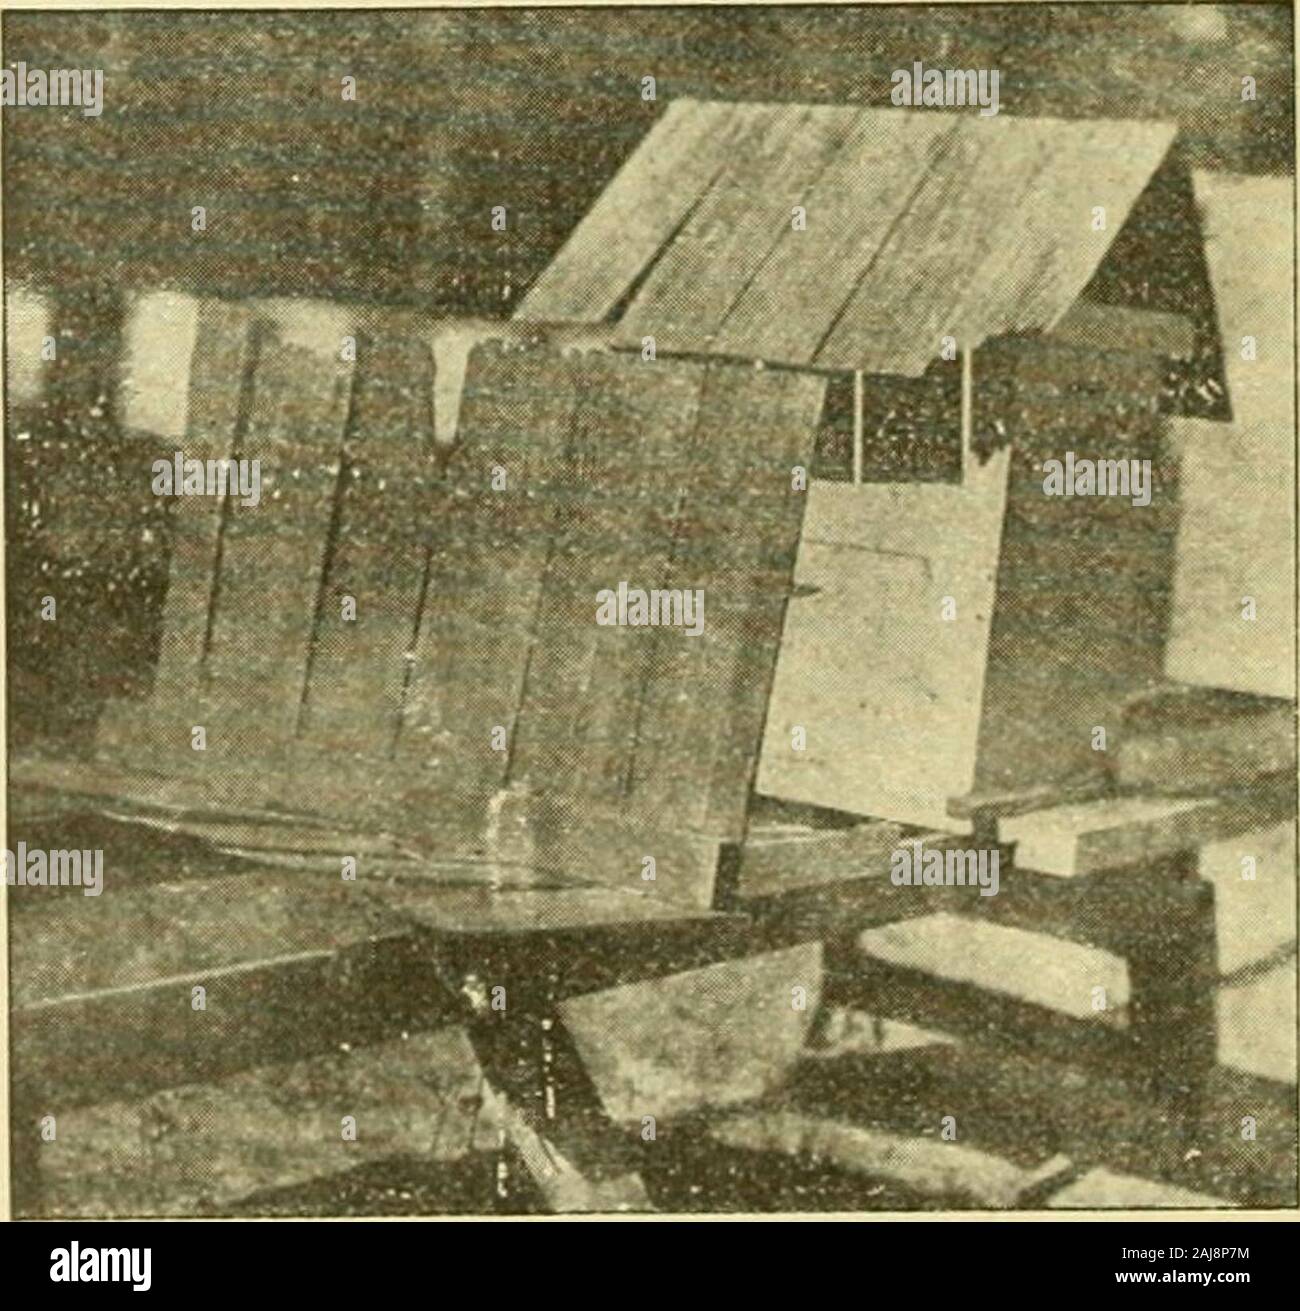 Gleanings in bee culture . for shading hives.In Fig. 6 we have Mr. Mar-chants scheme for shadinghives. The ridge piece is madeof inch lumber a little longerthan the hive, with cheap shin-gles nailed on to it at right an-gles to each other, as shown inthe illustration. This kind ofshade-board is very cheap, andits shape gives a little better cir-culation of air between theshade-board and the top of thehive than the ordinary arrange-ment lying flat on the hive. Fig. 7 shows a four-story ten-frame colony operated for ex-tracted honey. You will noticethis stands up on scales for re-cording the hon Stock Photo